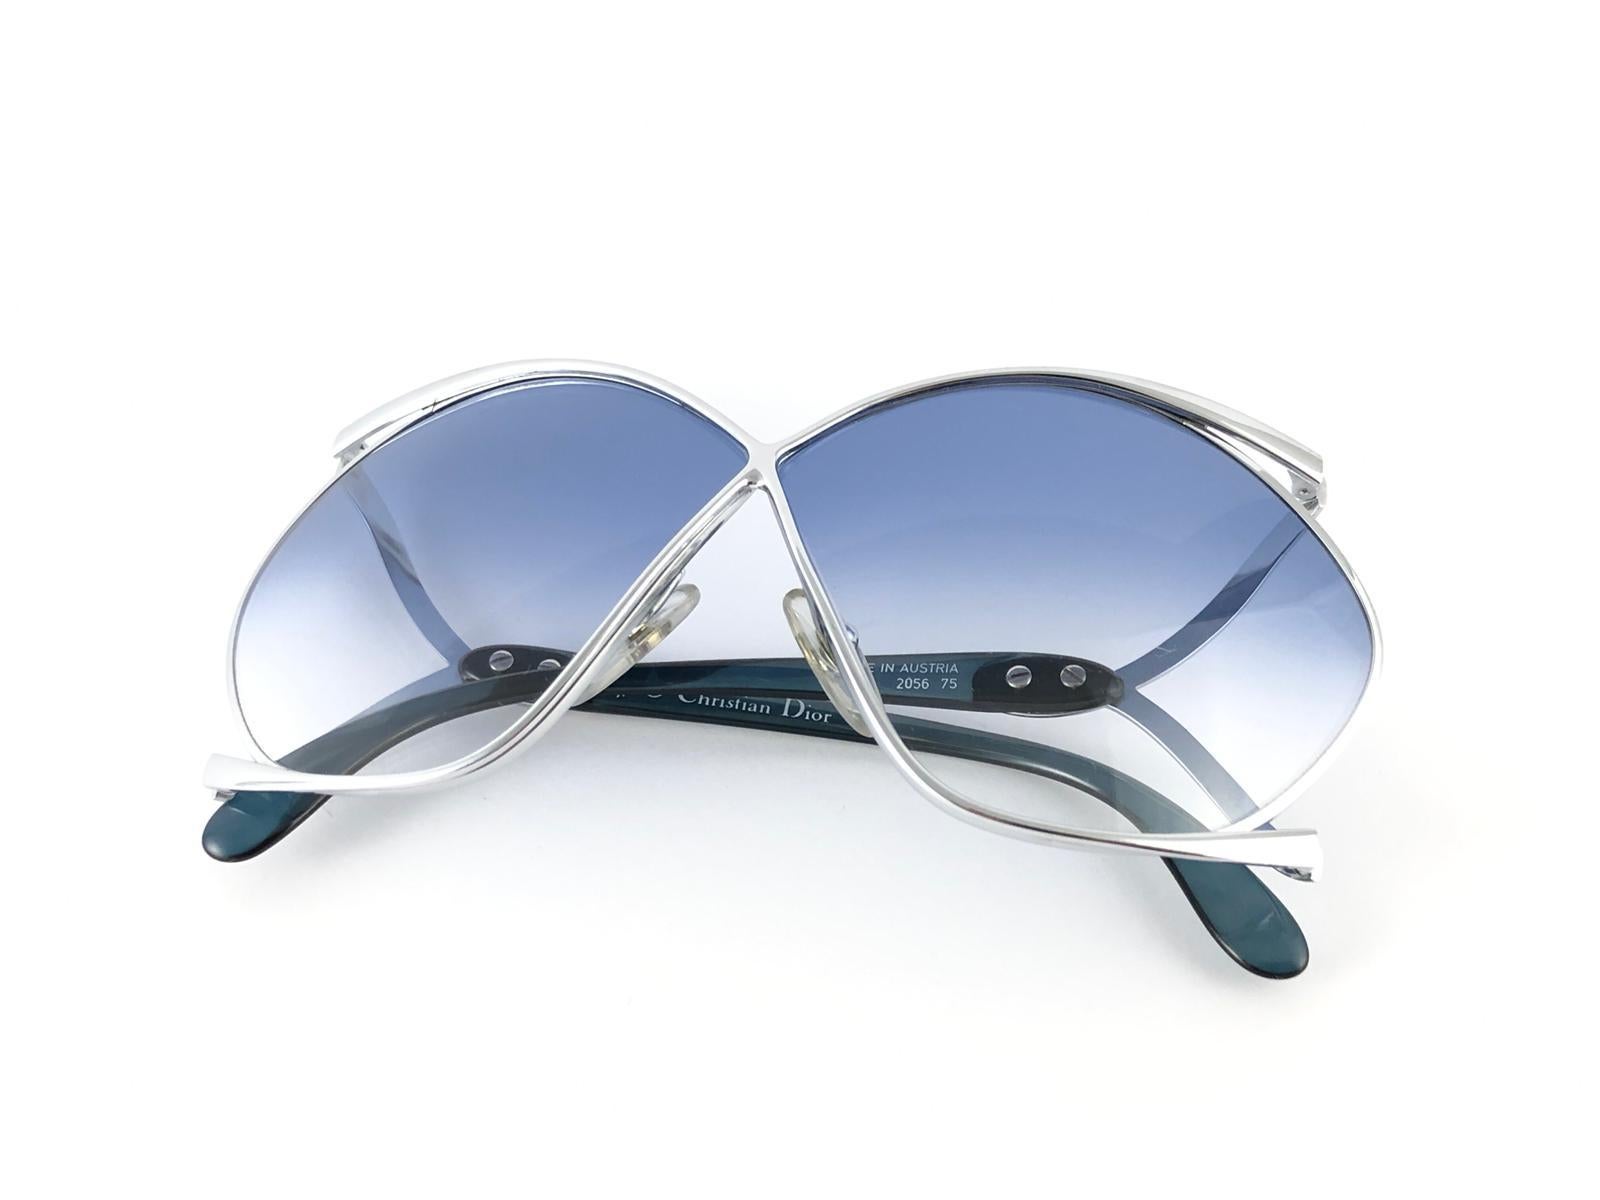 New Vintage Christian Dior 2056 75 Butterfly Silver & Green Sunglasses 1